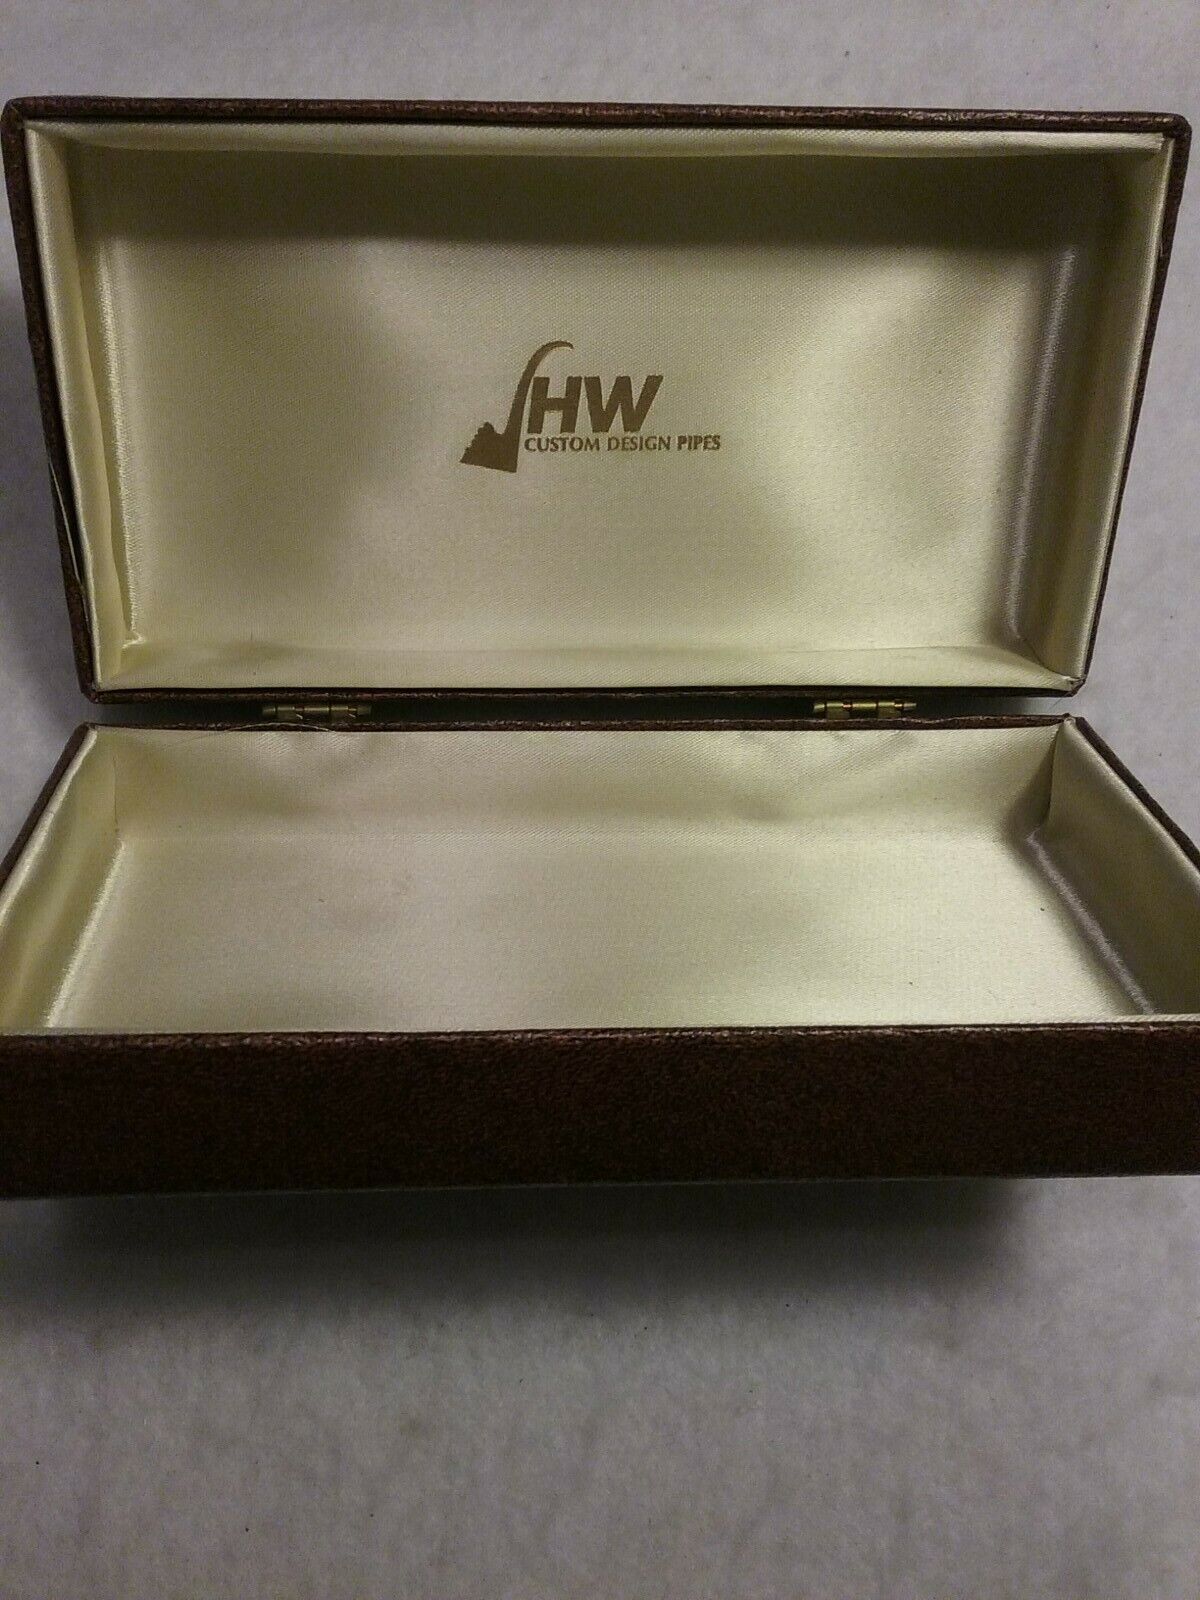 Jack H. Weinberger U.S.A original  custom made pipe case for JHW pipes. 